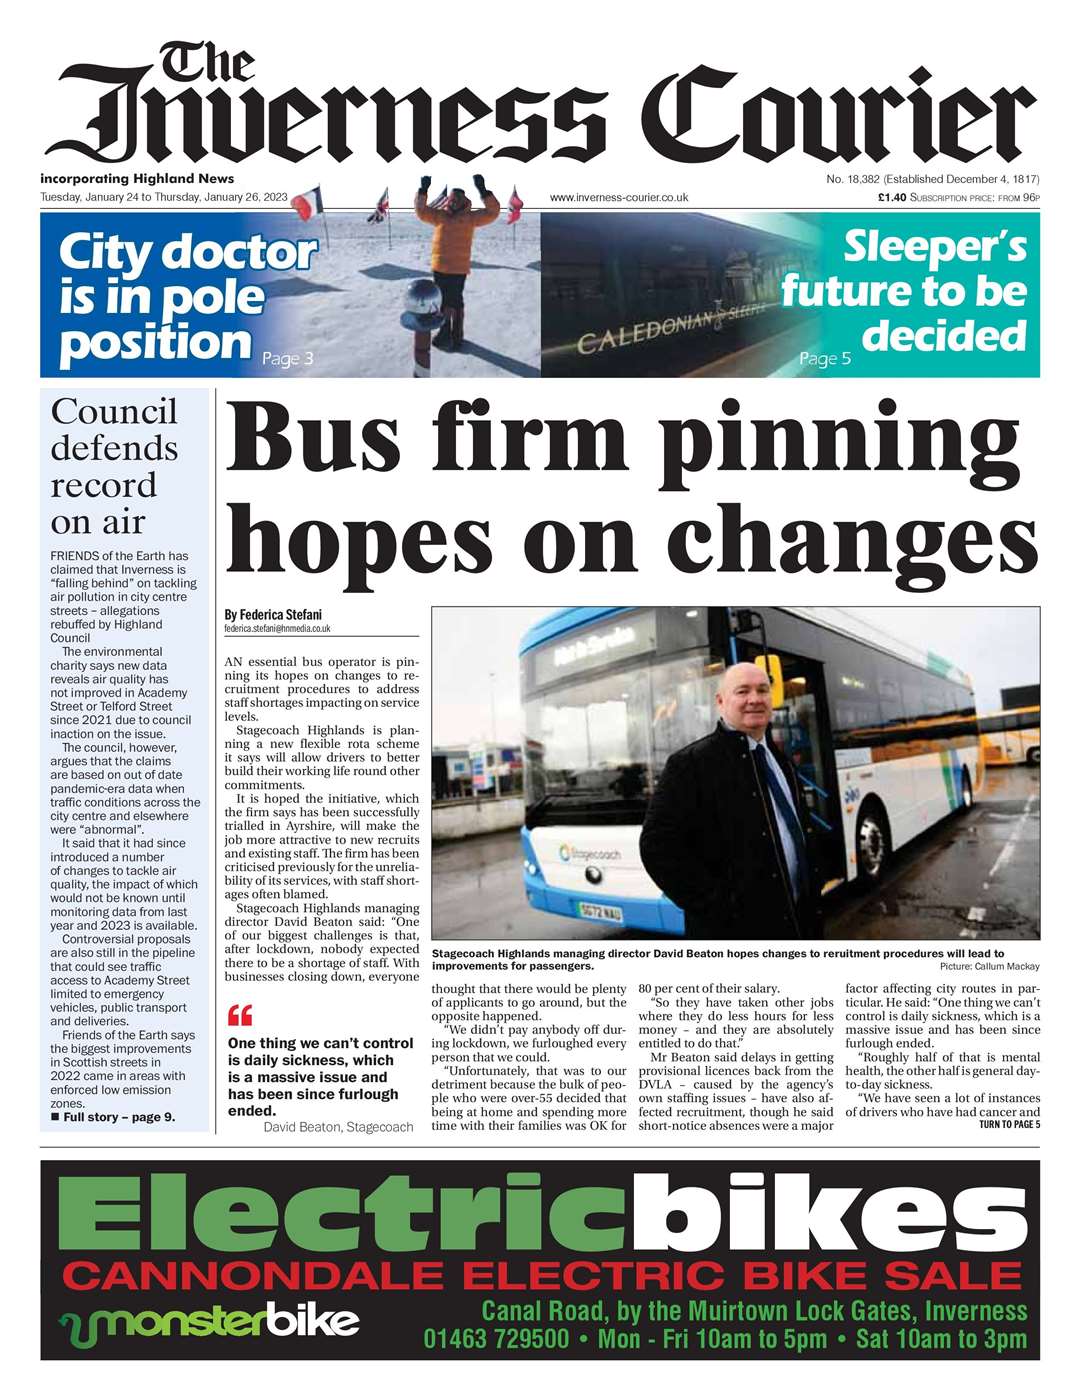 The Inverness Courier, January 24, front page.